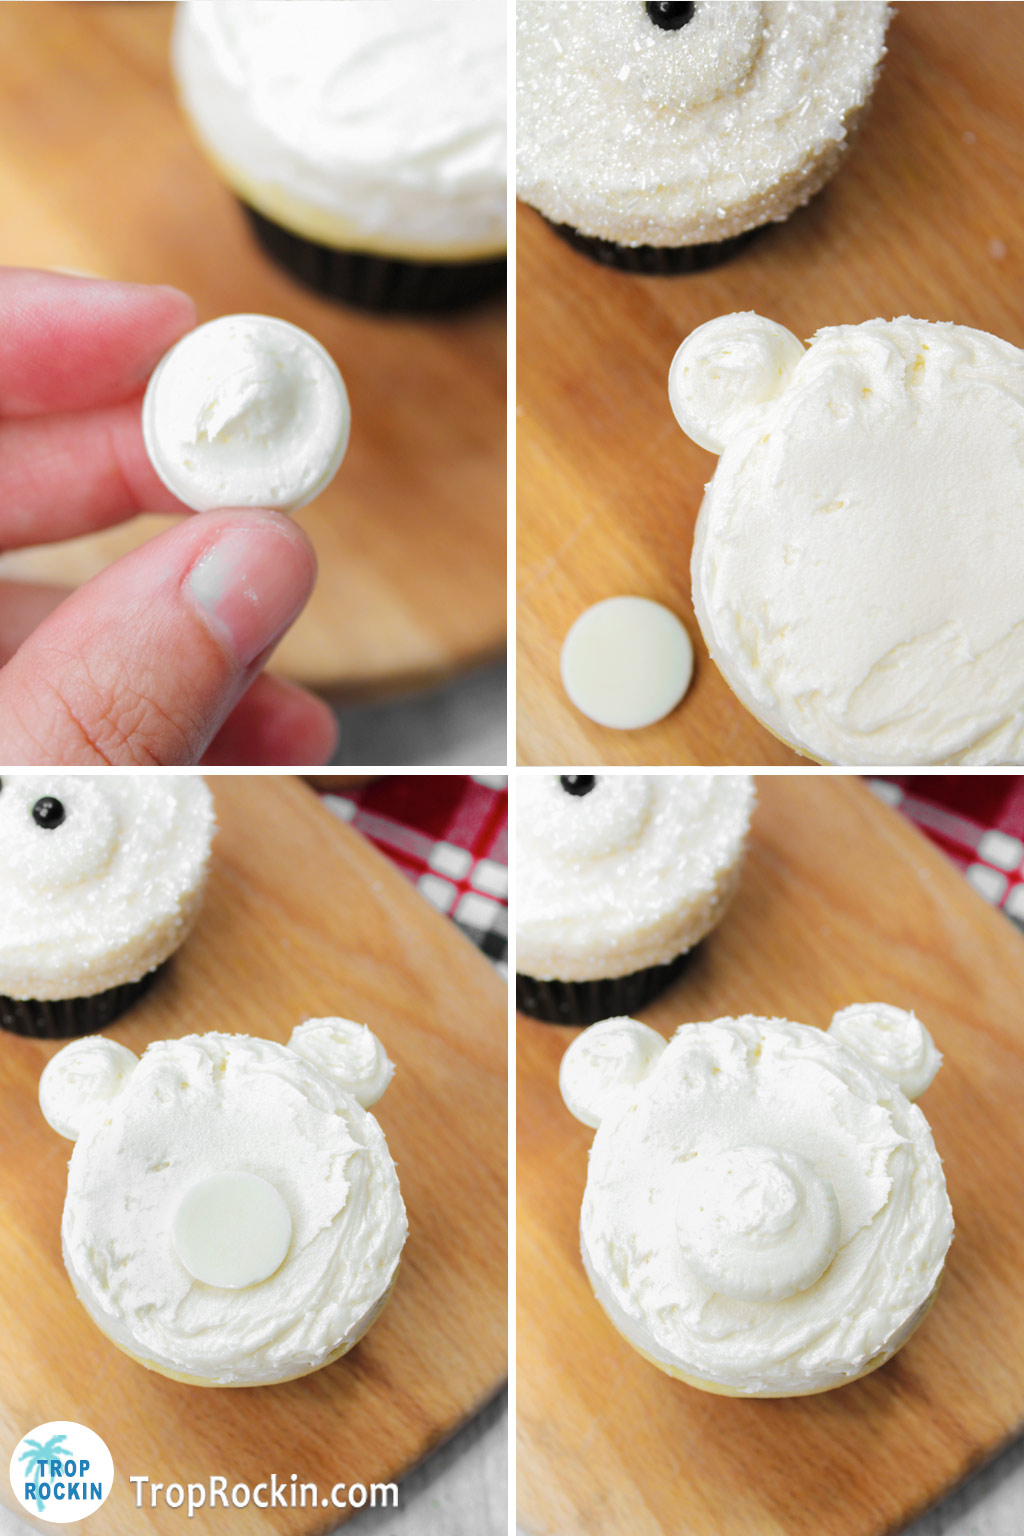 Four photo collage decorating the polar bear cupcakes: top left is added frosting to a chocolate wafer, top right is the wafer pressed partially into the frosted cupcake, bottom left shows both wafers for ears and a wafer without frosting in the middle of the cupcake and bottom right is the added frosting on the wafer for the nose.